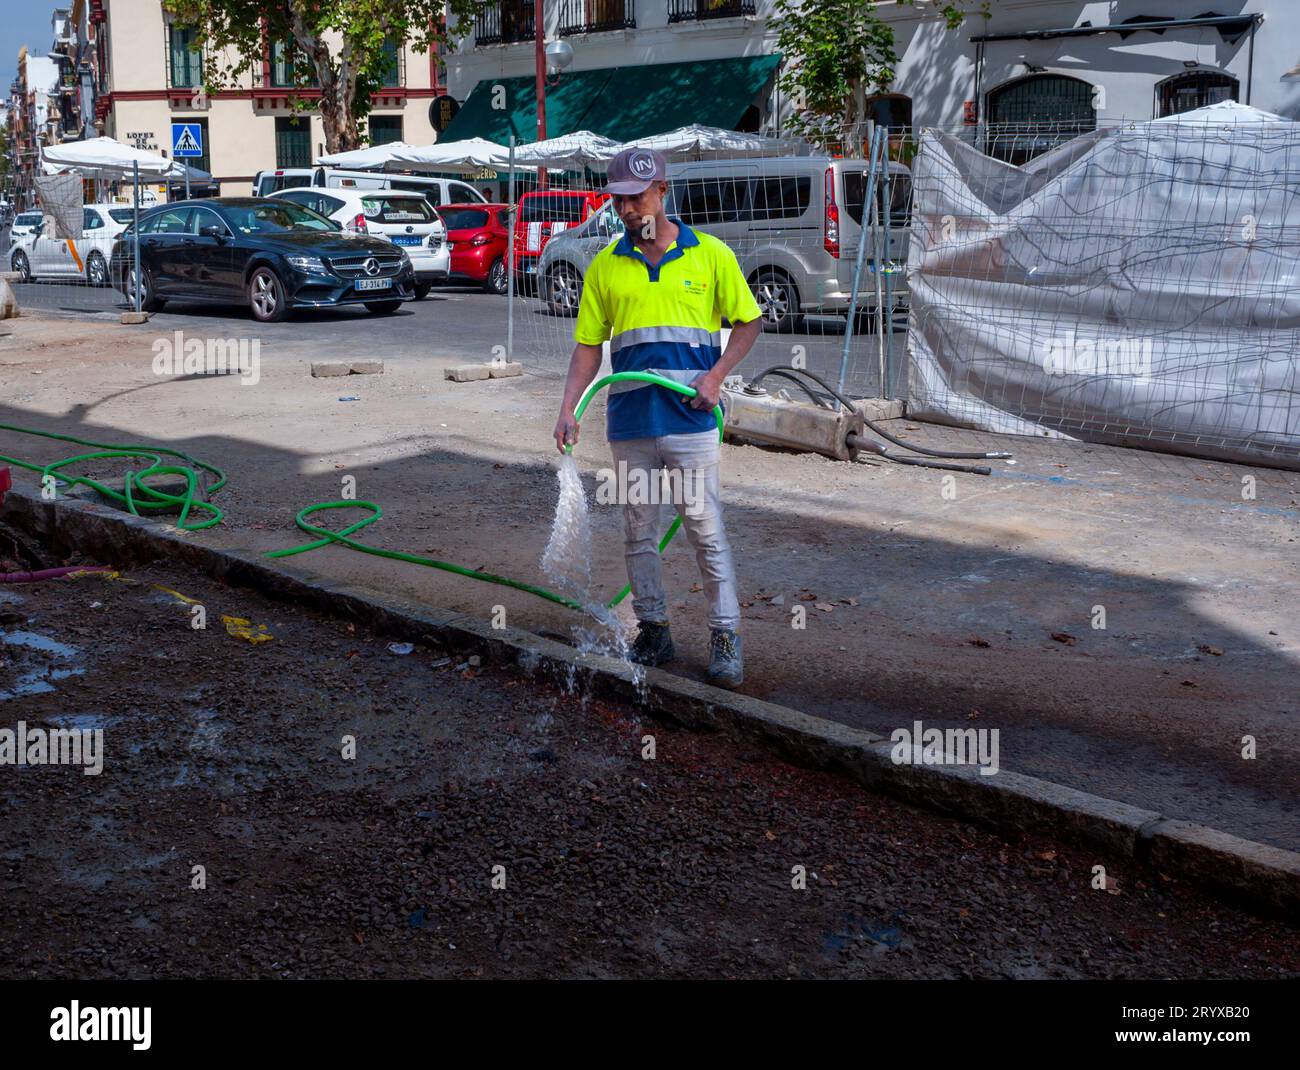 Seville Spain, Construction WOrkers on Street, in Old Town Center, Heat Wave, Watering Down Pavement Stock Photo